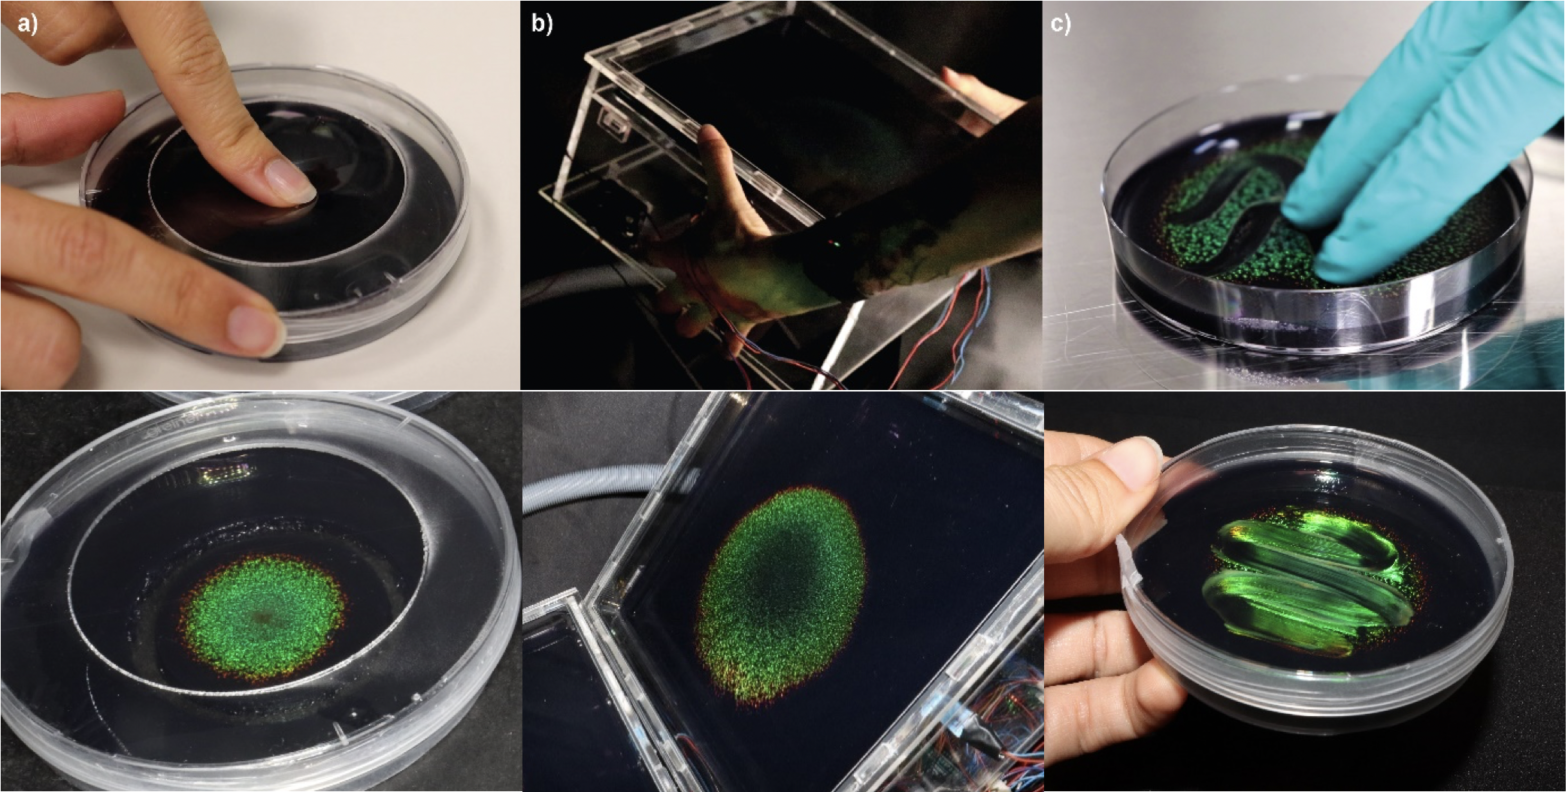 There are hands that are touching or pressing on flavobacteria. There are visual responses to human inputs of pressing, tilting and swiping. The colors change with circular green patterns emerging.